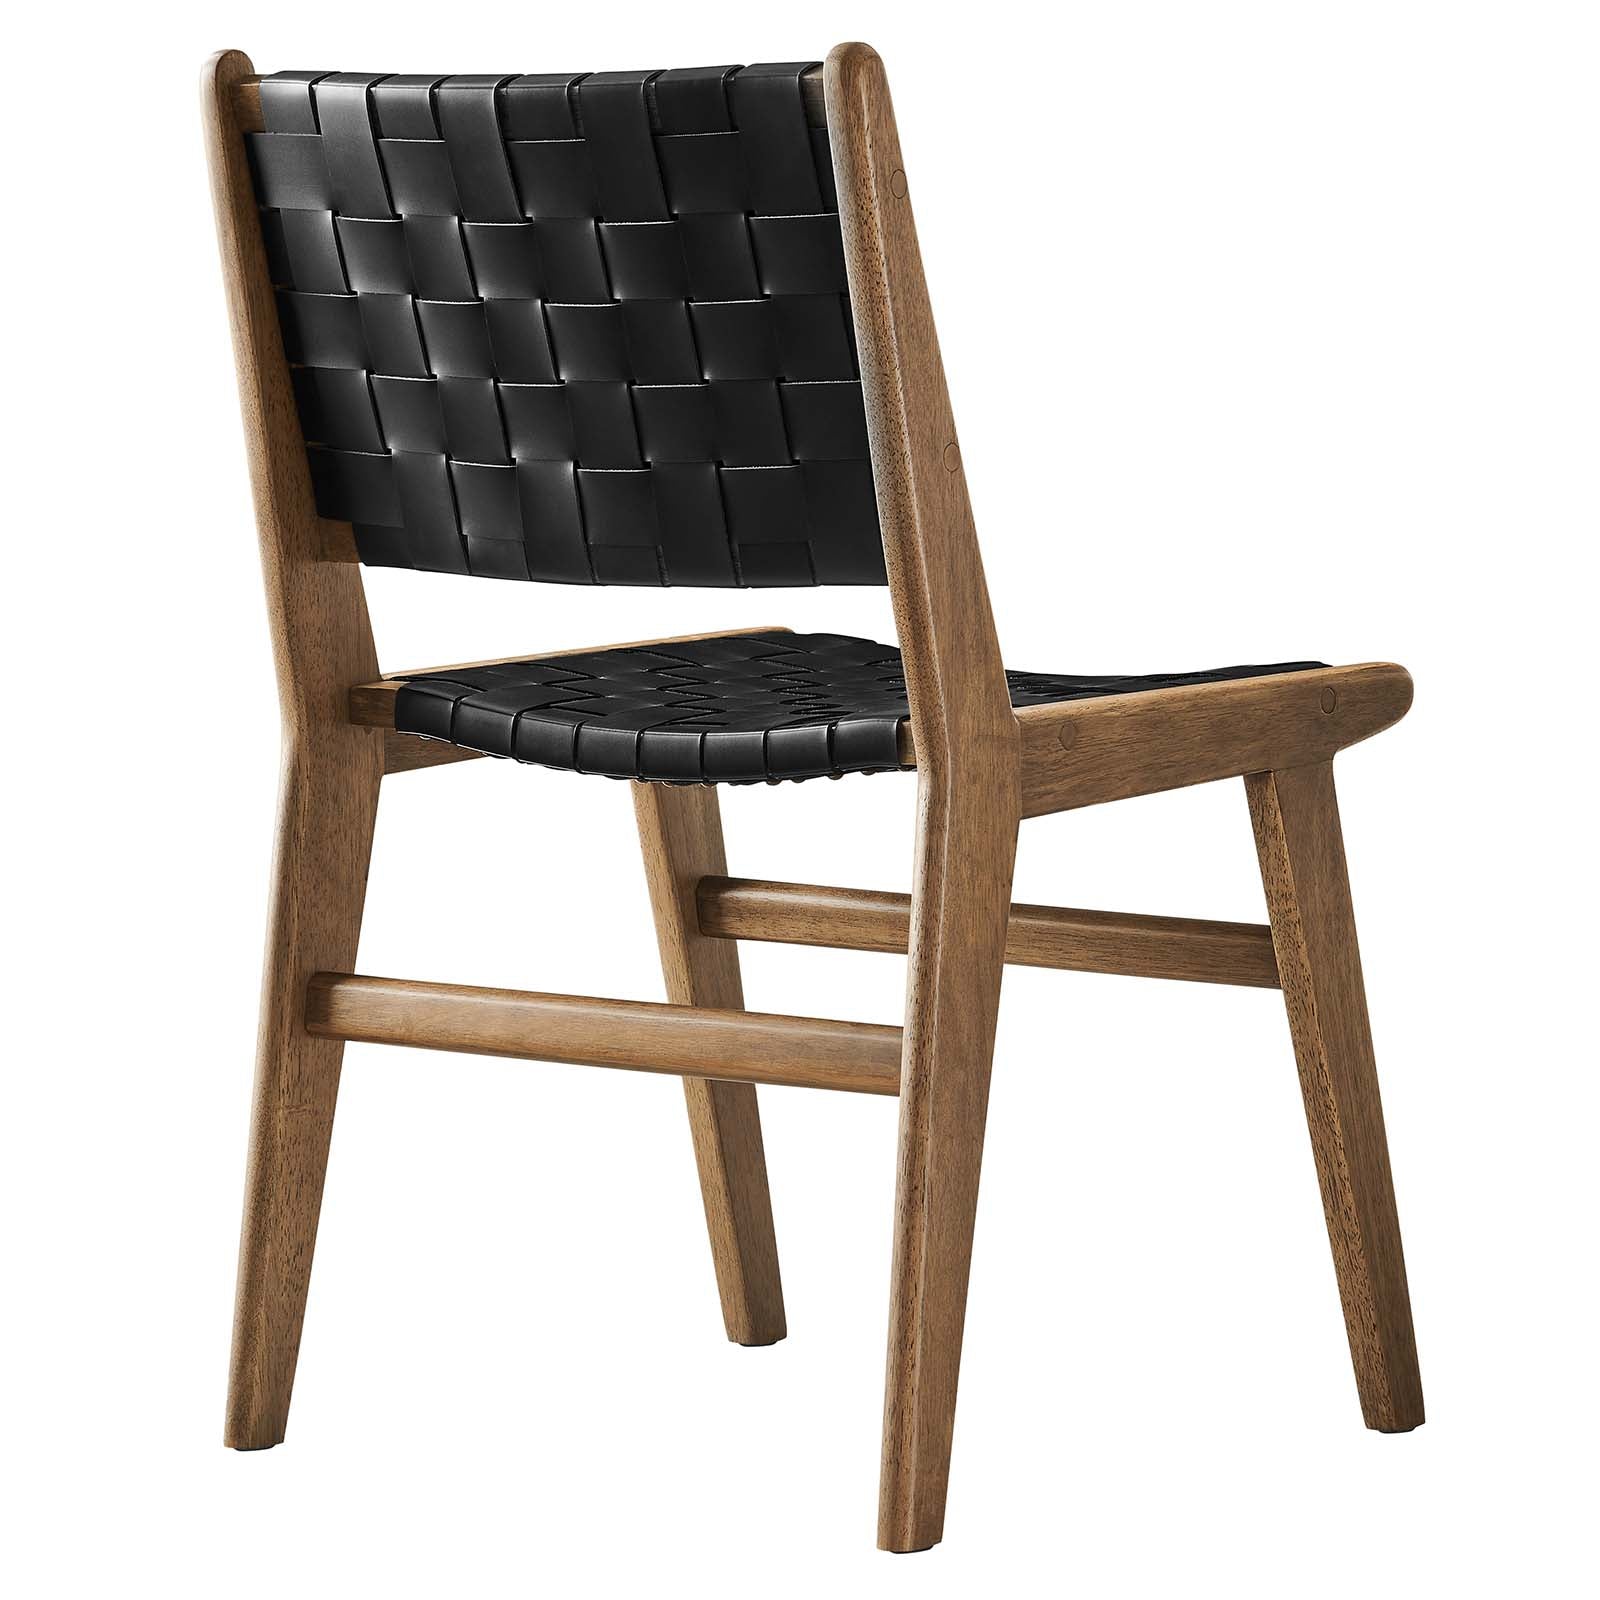 Saorise Woven Leather Wood Dining Side Chair - Set of 2